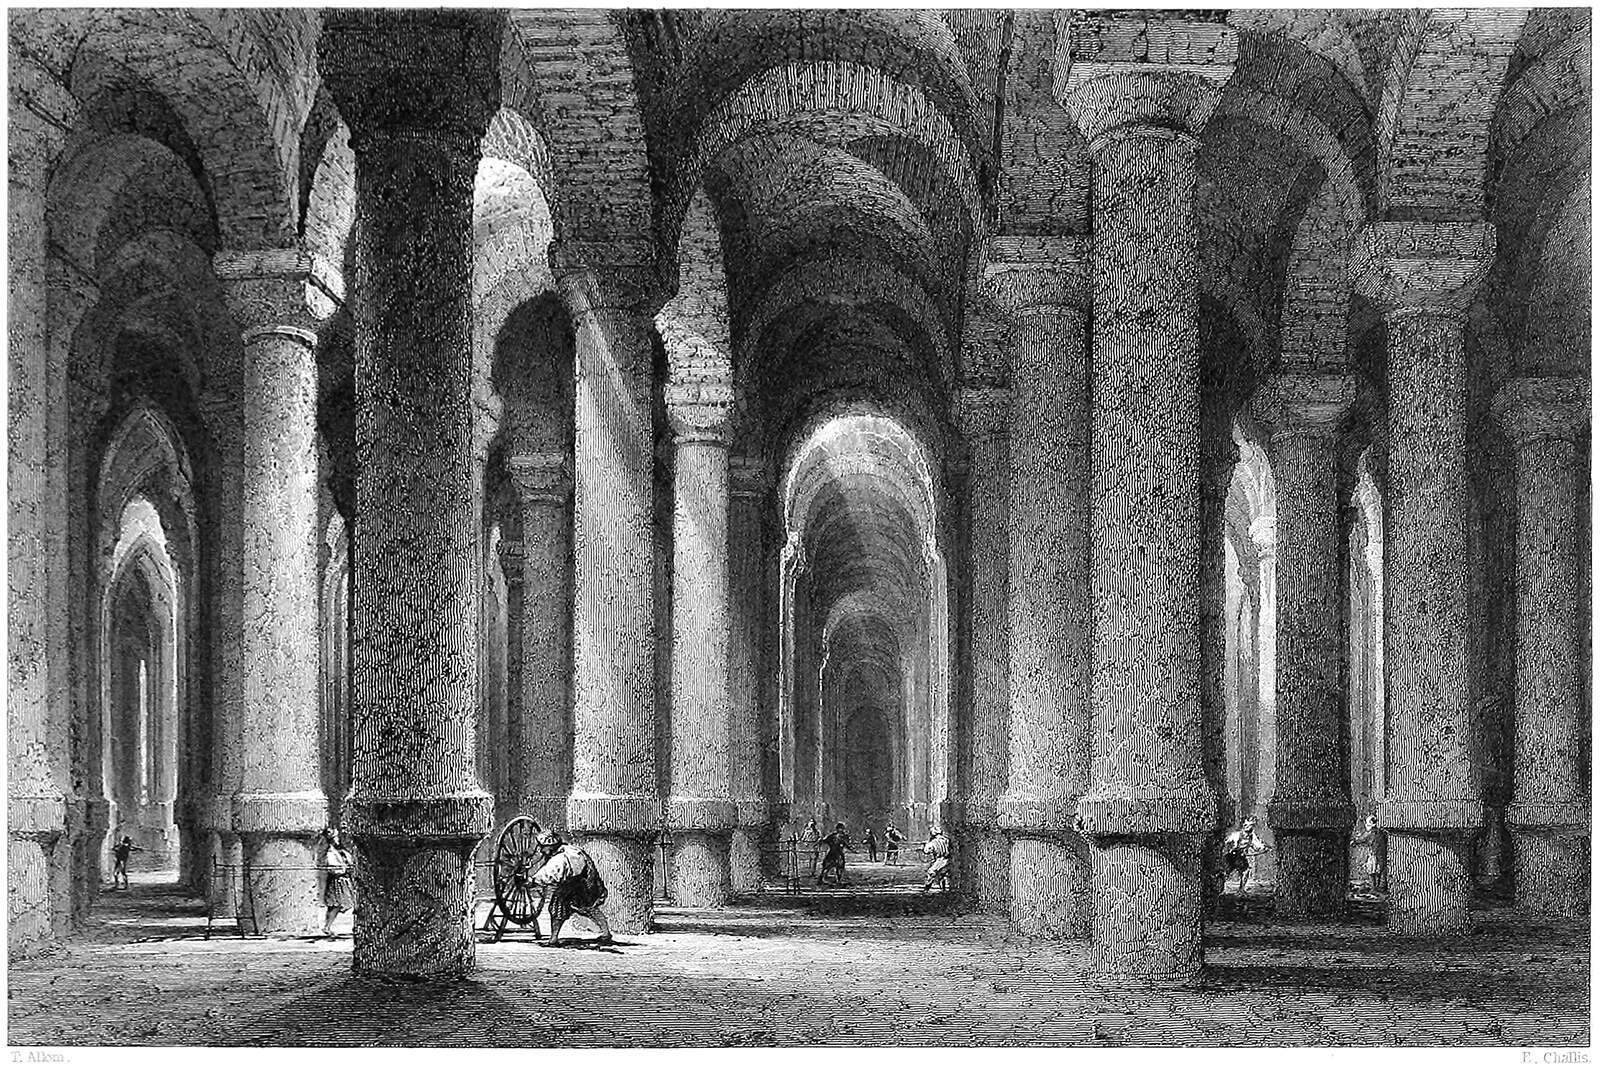 The Cistern of Philoxenos, a subterranean reservoir in Istanbul